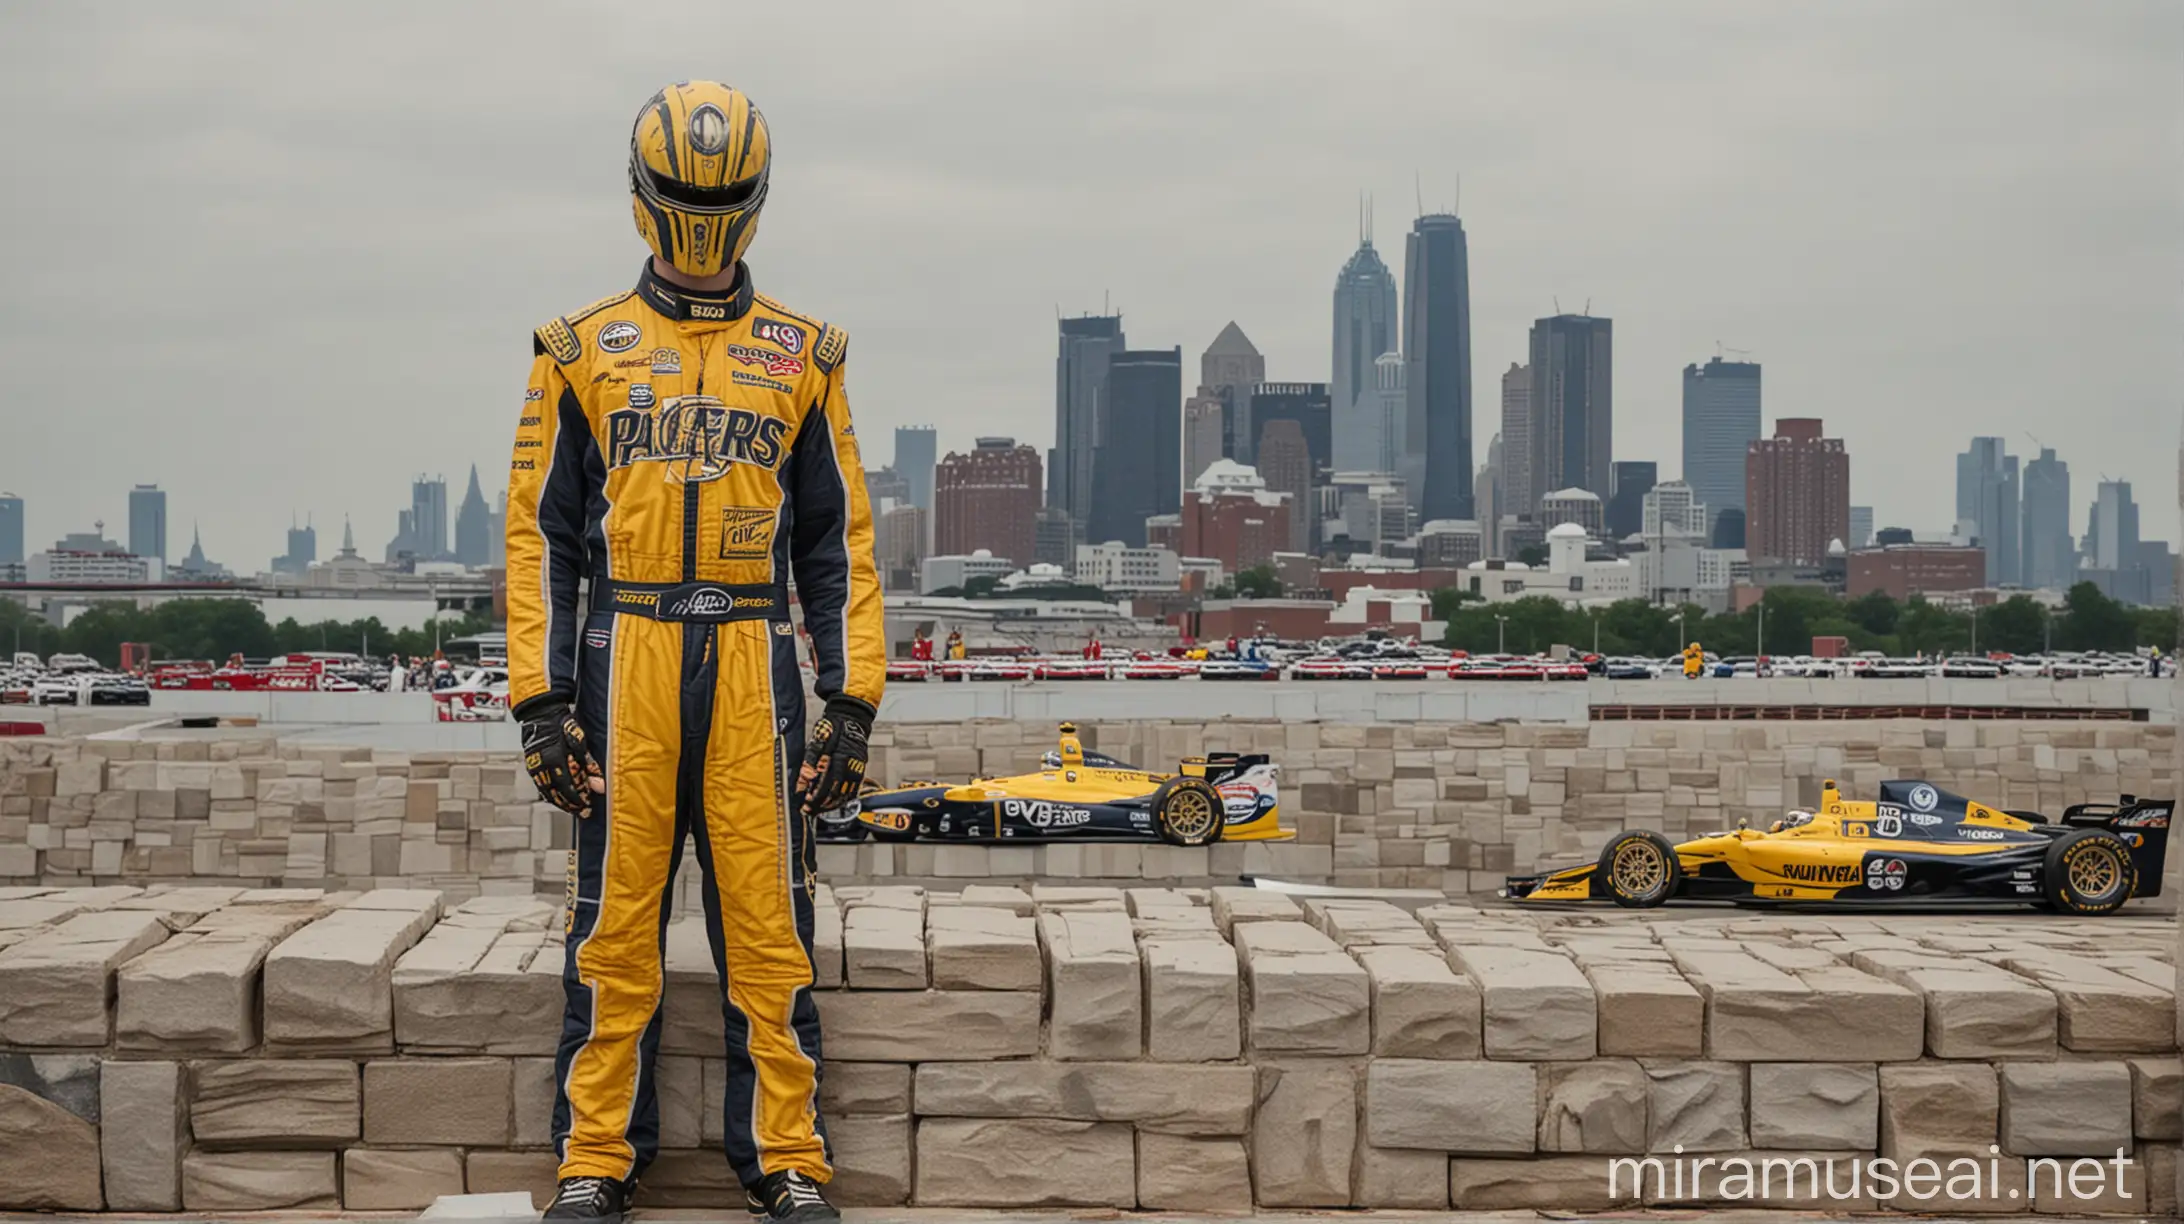 alien-headed human dressed in racecar gear, standing on bricks in front of an Indycar with "indiana pacers" branding and logos, with the Indianapolis skyline in the background